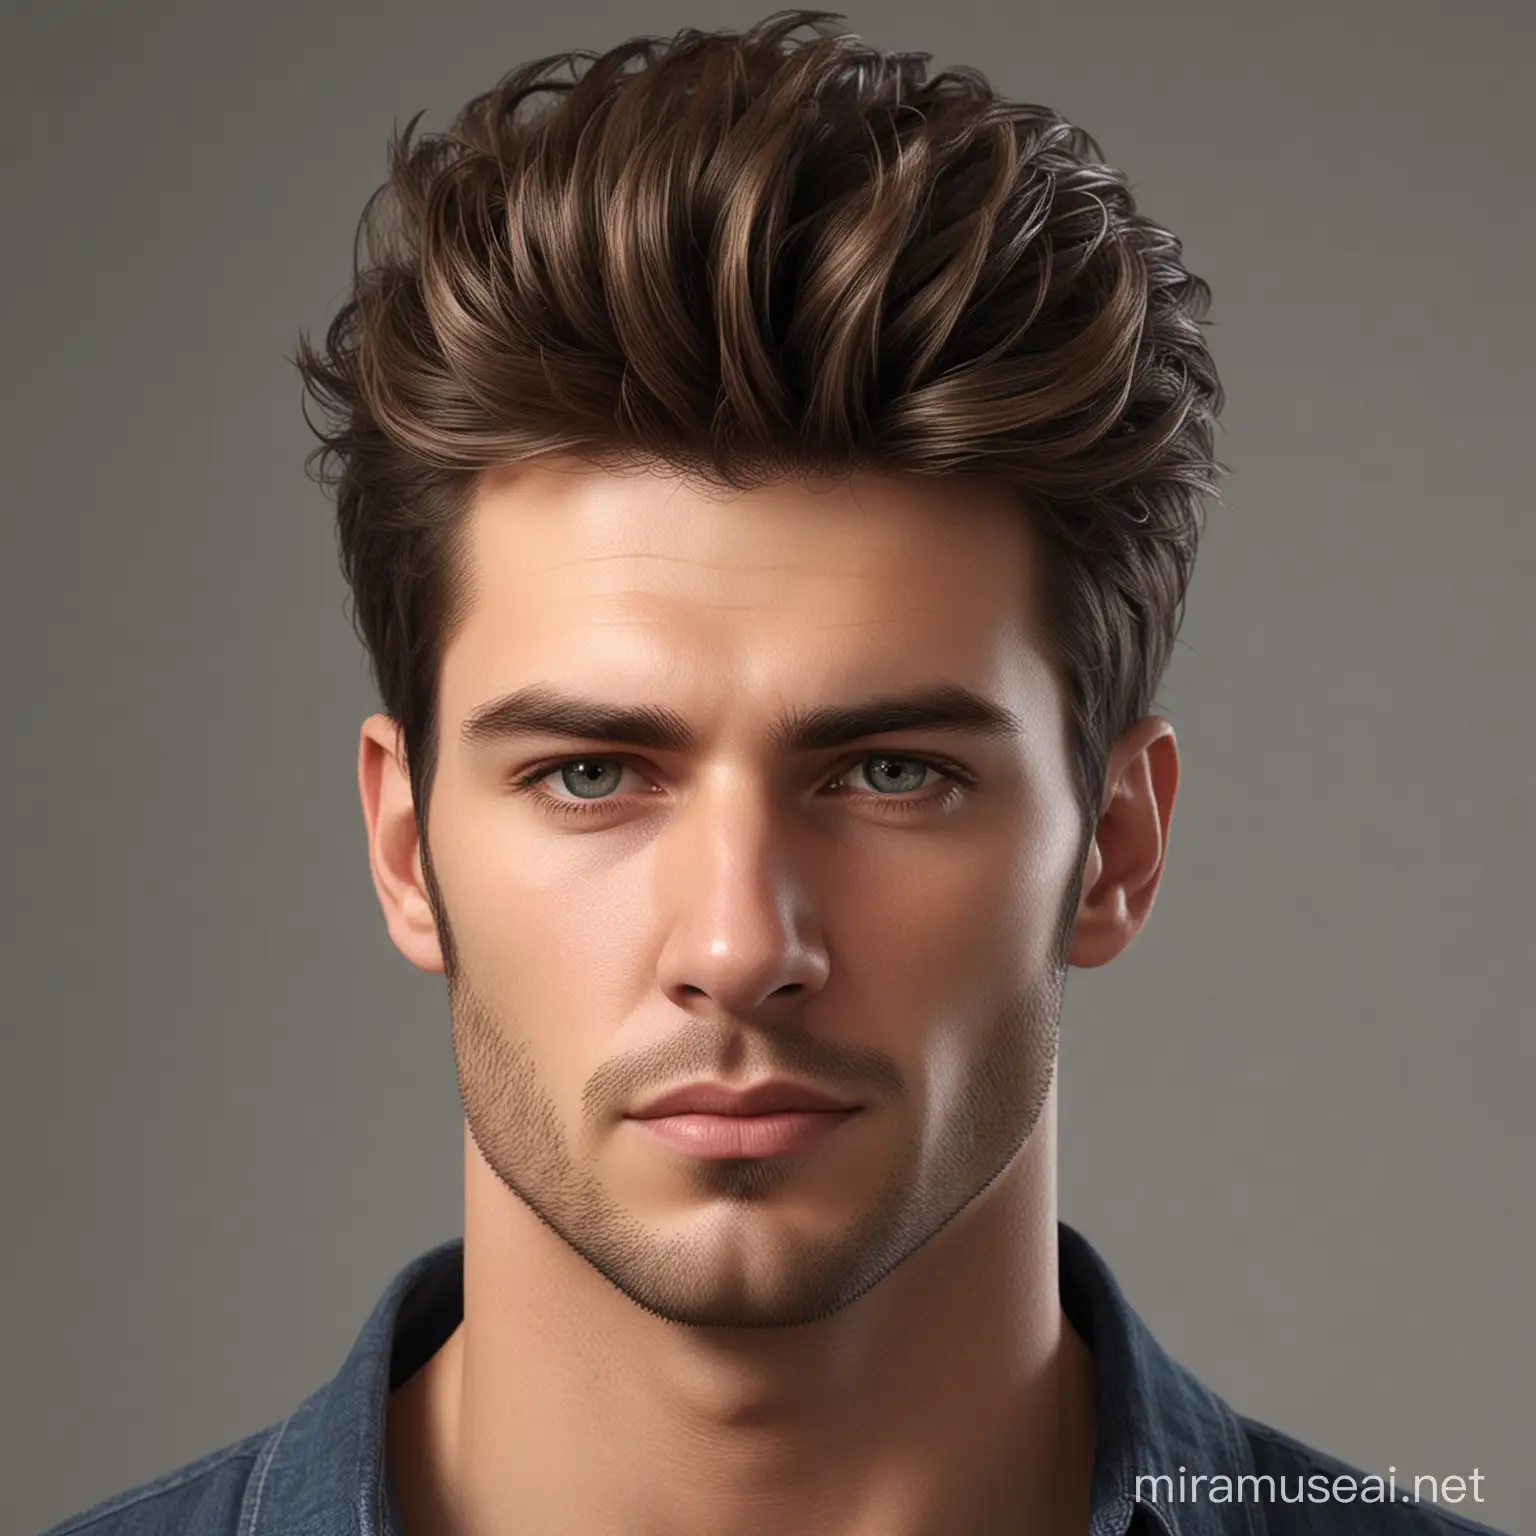 Man with Photorealistic Natural Hair Texture and Stunning Hairstyle